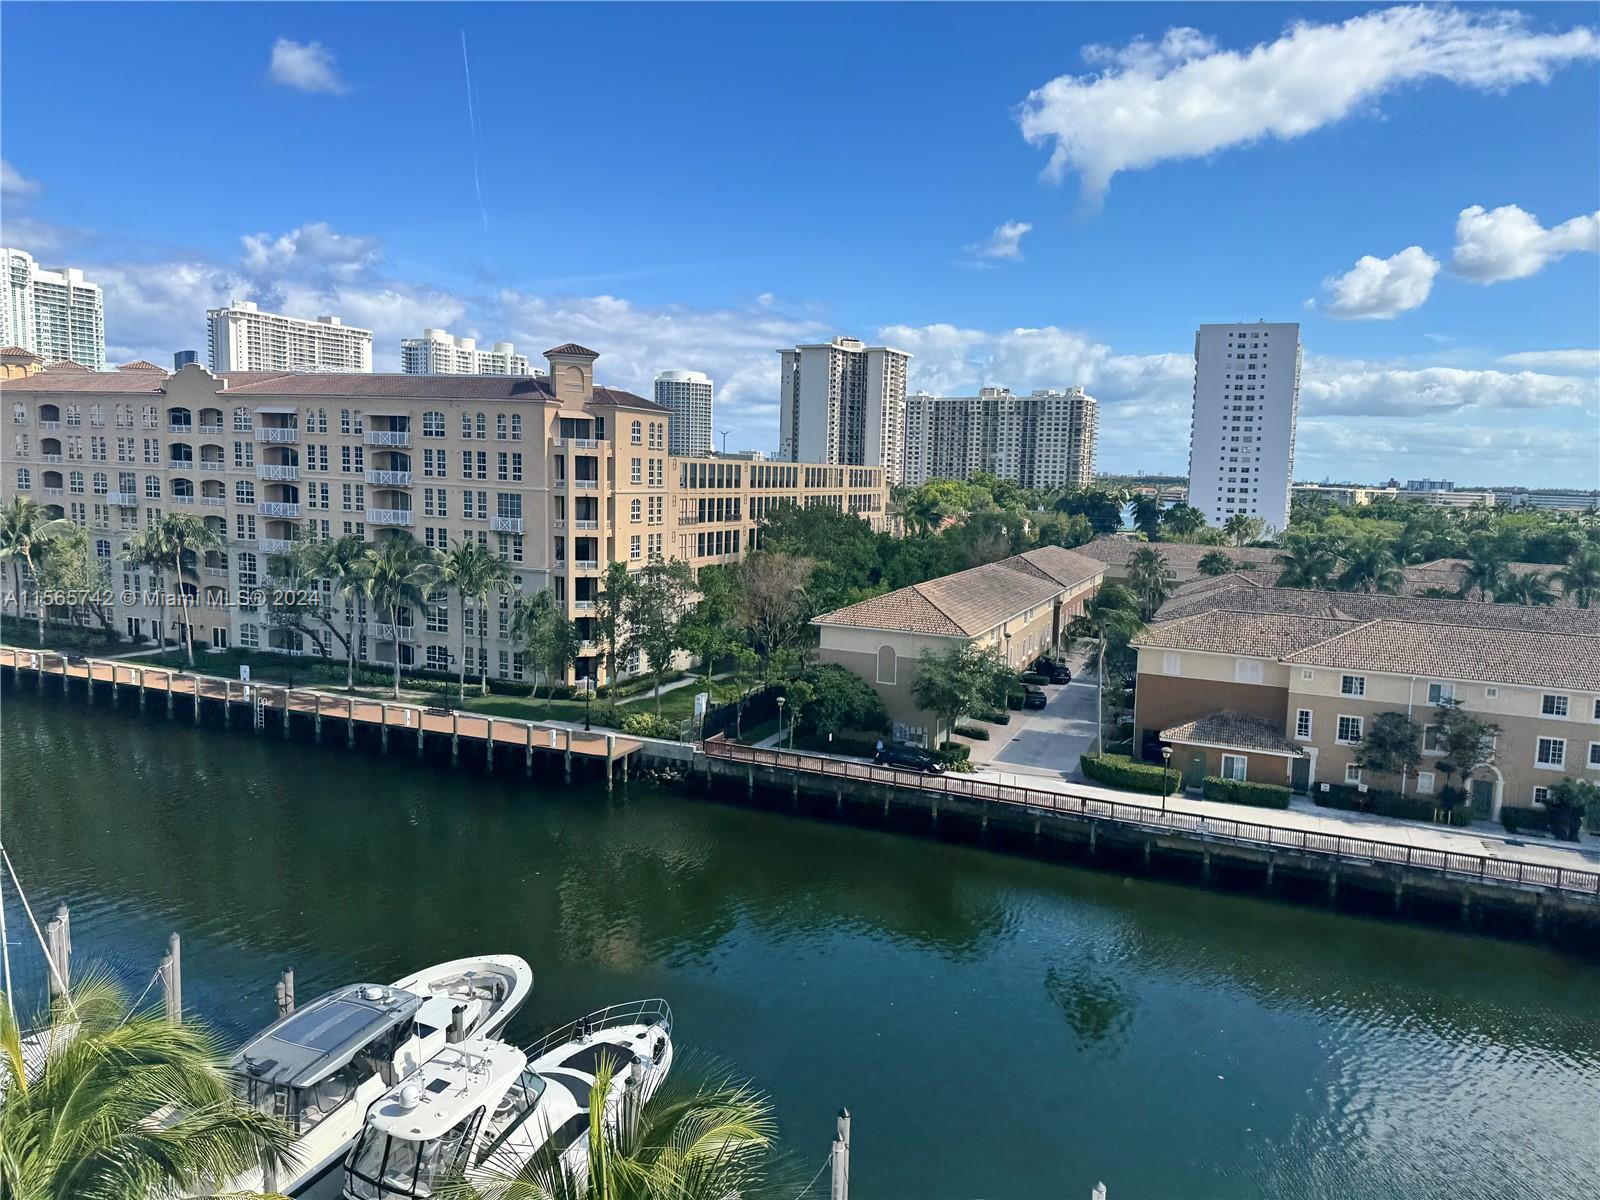 VERY SPACIOUS 2 STORY 1 BEDROOM, 2 FULL BATHROOMS WITH STUNNING DIRECT INTERCOSTAL VIEWS. TWO GREAT SIZE WATERFRONT BALCONIES. UPGRADED MODERN TOP OF THE LINE KITCHEN WITH STAINLESS STEAL APPLIANCES. CUSTOMIZED CLOSETS. AMAZING WATER VIEWS FROM LIVING ROOM AND MASTER. THE BUILDING OFFERS A LOT OF AMAZING AMENITIES LIKE SEVERAL POOLS, FITNESS CENTER, SPA, RACQUETBALL, TENNIS COURT, PRIVATE THEATER, PARTY ROOM, BILLIARD ROOM, 24 HOURS SECURITY, FULL TIME CONCIERGE, VALET, SMART TECHNOLOGY BUILDING WITH OUTSTANDING WATER VIEWS, AWESOME MARINA AND MUCH MORE. FABULOUS LOCATION IN THE HEART OF AVENTURA, CLOSE TO RESTAURANTS, SCHOOLS, AVENTURA MALL, SHOPS, PARKS, THE BEACH AND ENTERTAINMENT. PLEASE CALL TENANT UNTIL 05/31/2024